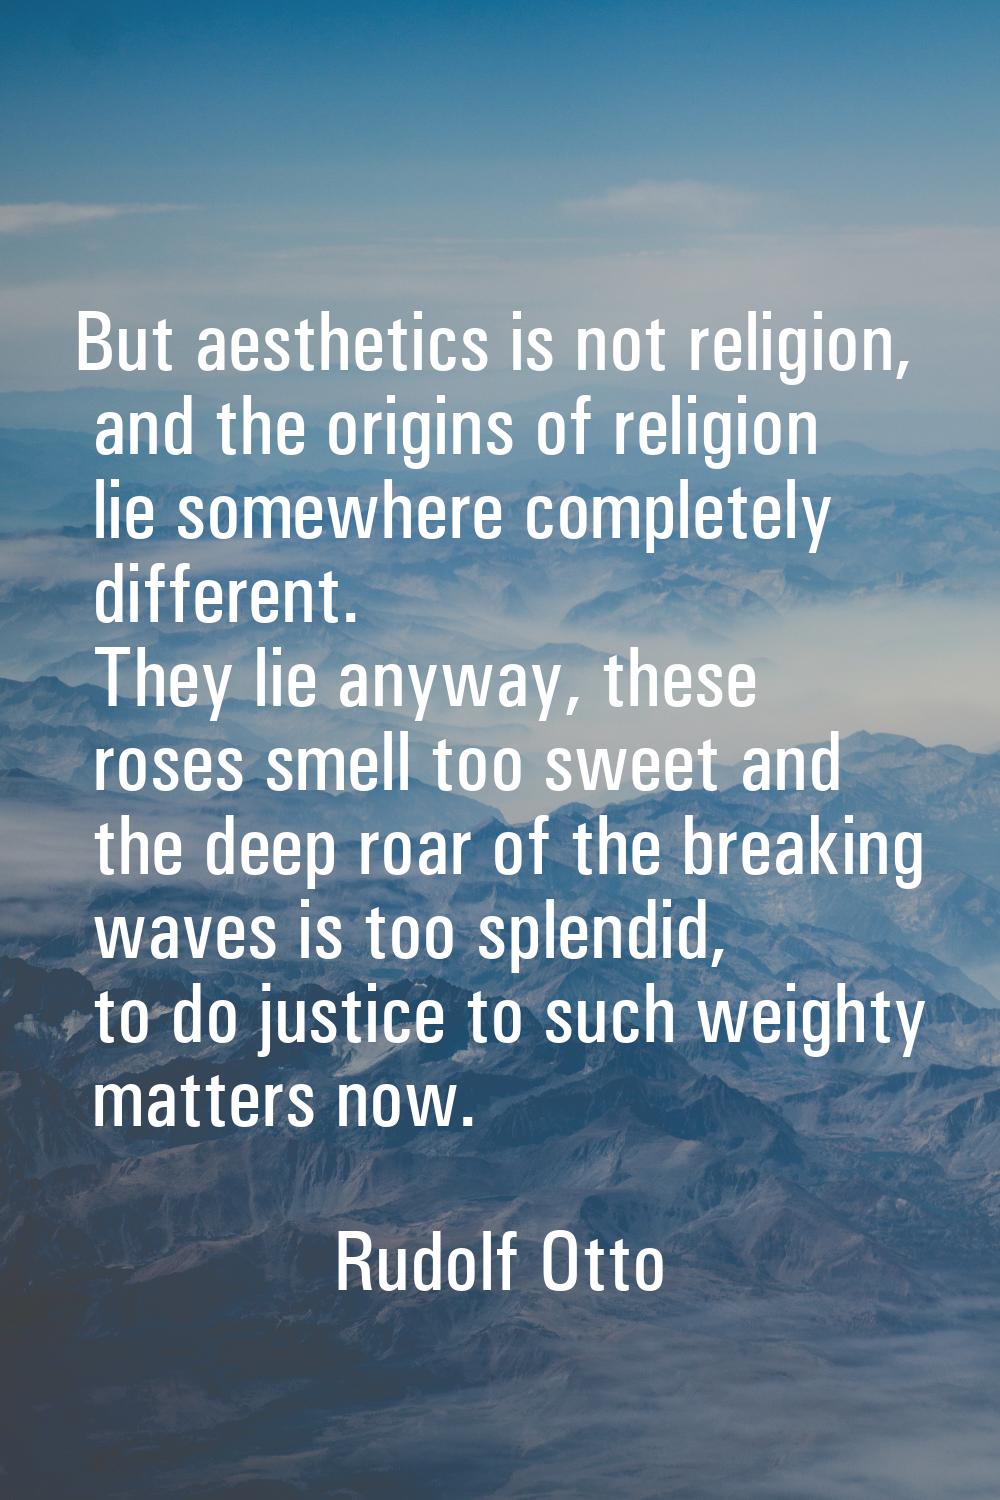 But aesthetics is not religion, and the origins of religion lie somewhere completely different. The